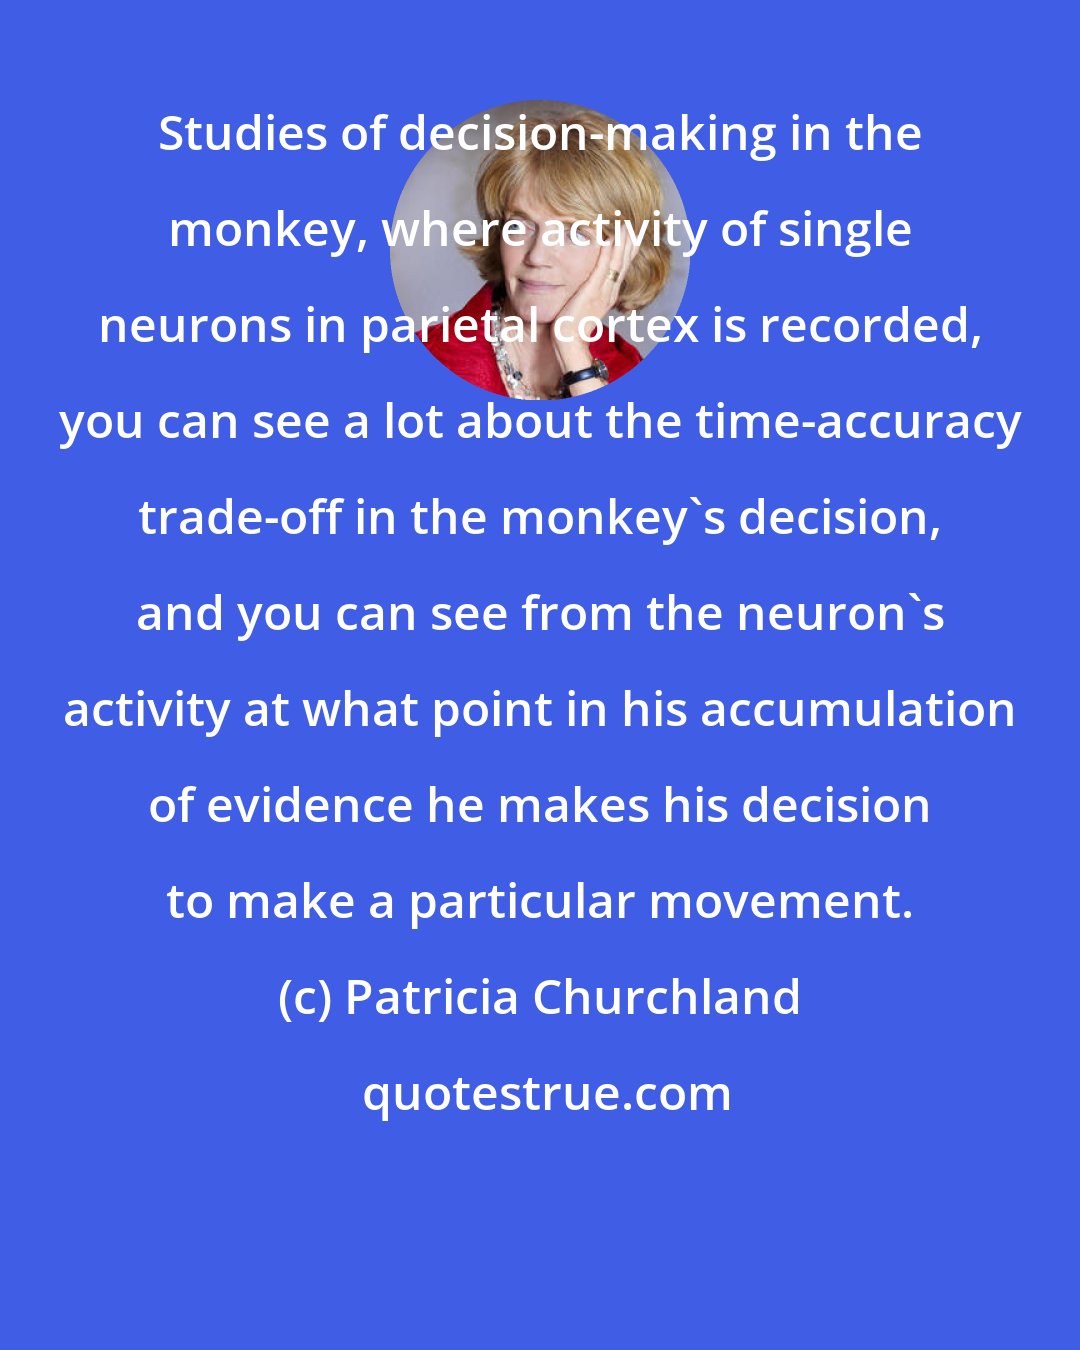 Patricia Churchland: Studies of decision-making in the monkey, where activity of single neurons in parietal cortex is recorded, you can see a lot about the time-accuracy trade-off in the monkey's decision, and you can see from the neuron's activity at what point in his accumulation of evidence he makes his decision to make a particular movement.